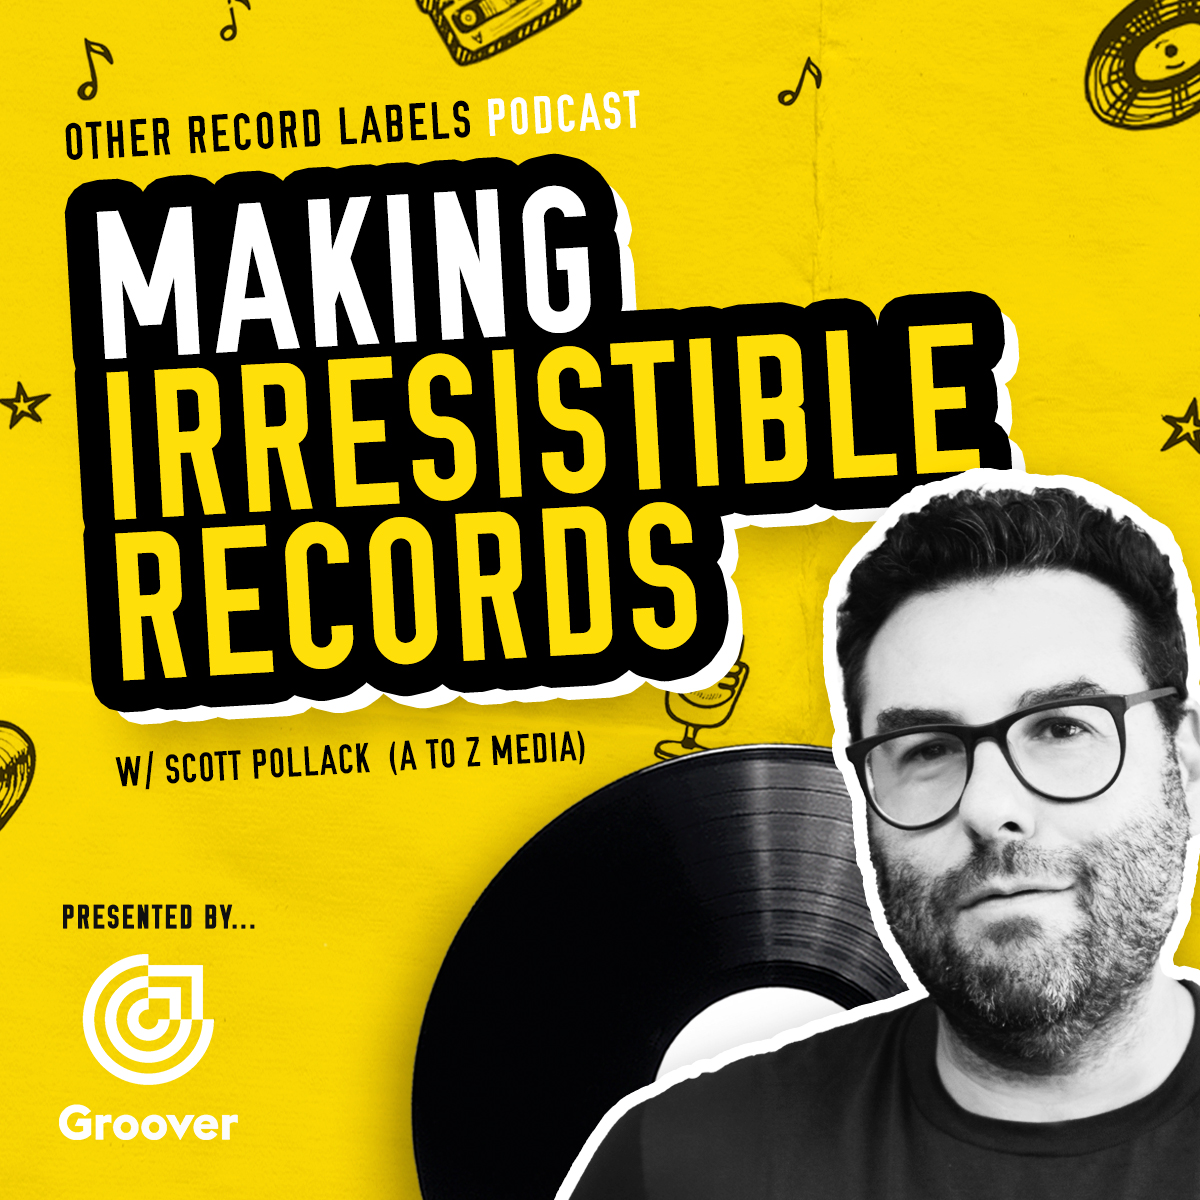 This week on the podcast, I chat with Scott Pollack from @atozmediainc about how #indieartists and #recordlabels can make irresistible records!

---

Presented by @HeyGroover